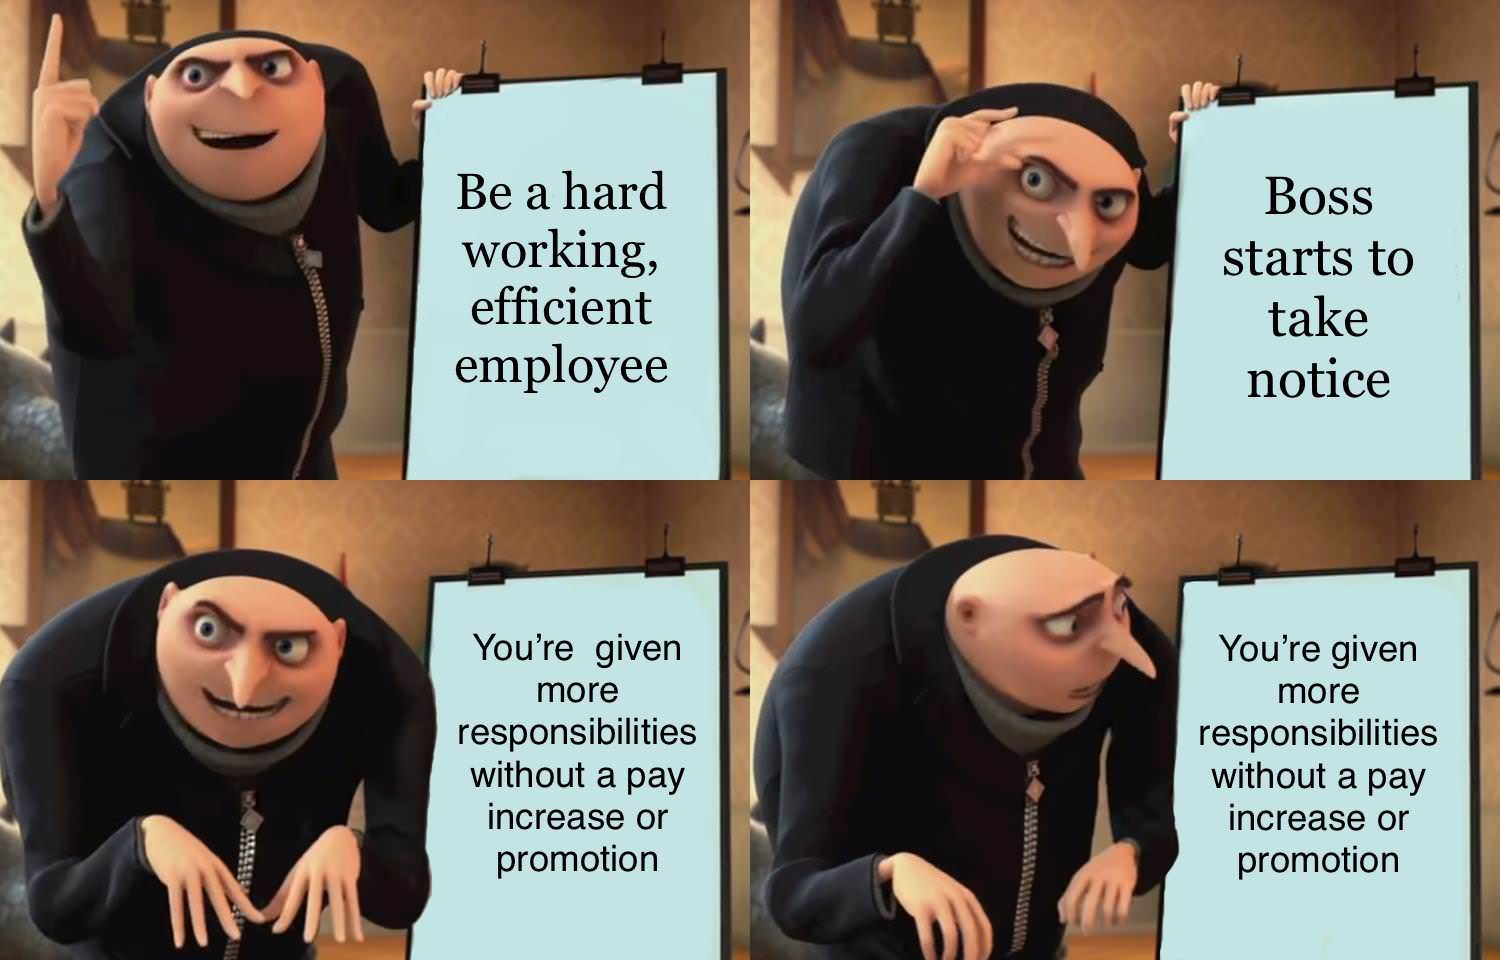 memes - gru meme template - Be a hard working, efficient employee Boss starts to take notice You're given more responsibilities without a pay increase or promotion You're given more responsibilities without a pay increase or promotion